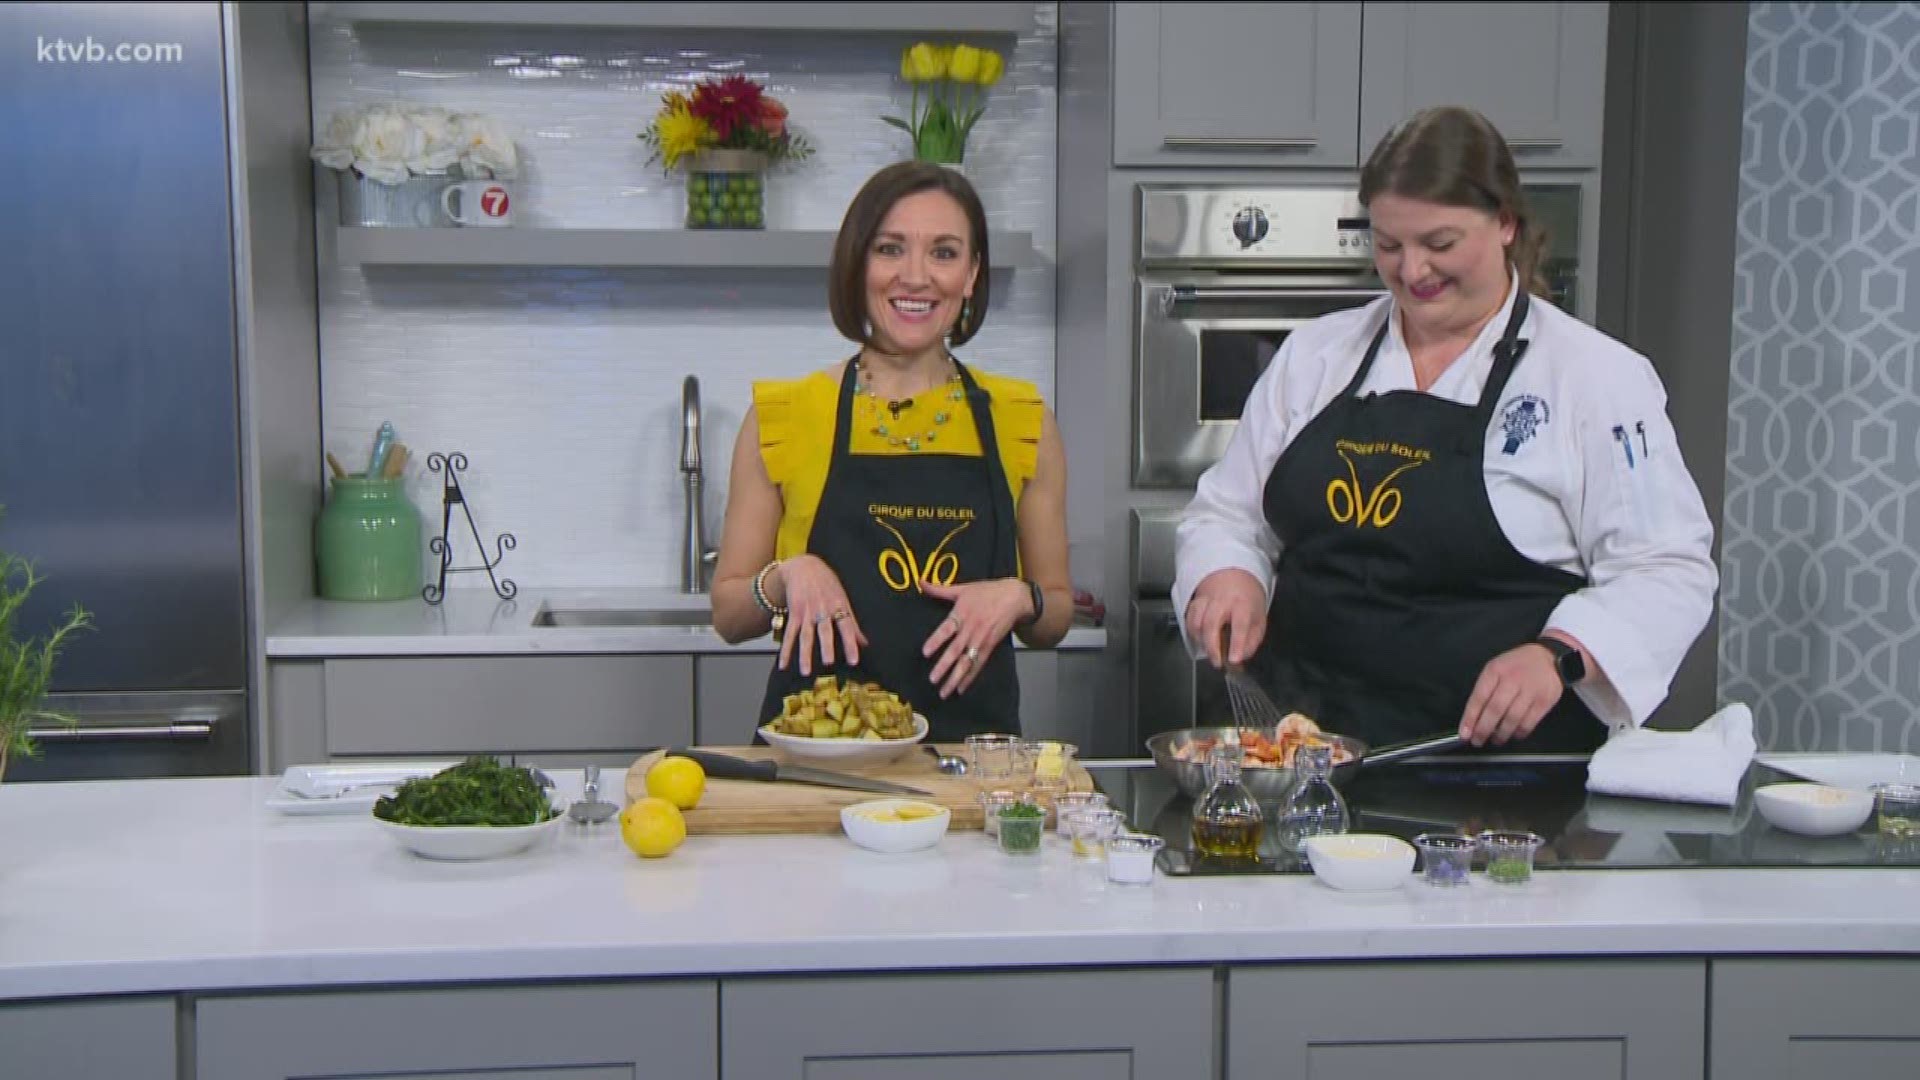 Executive Chef Tiffany Cole joined us on the News at Noon to make an Idaho-inspired dish.